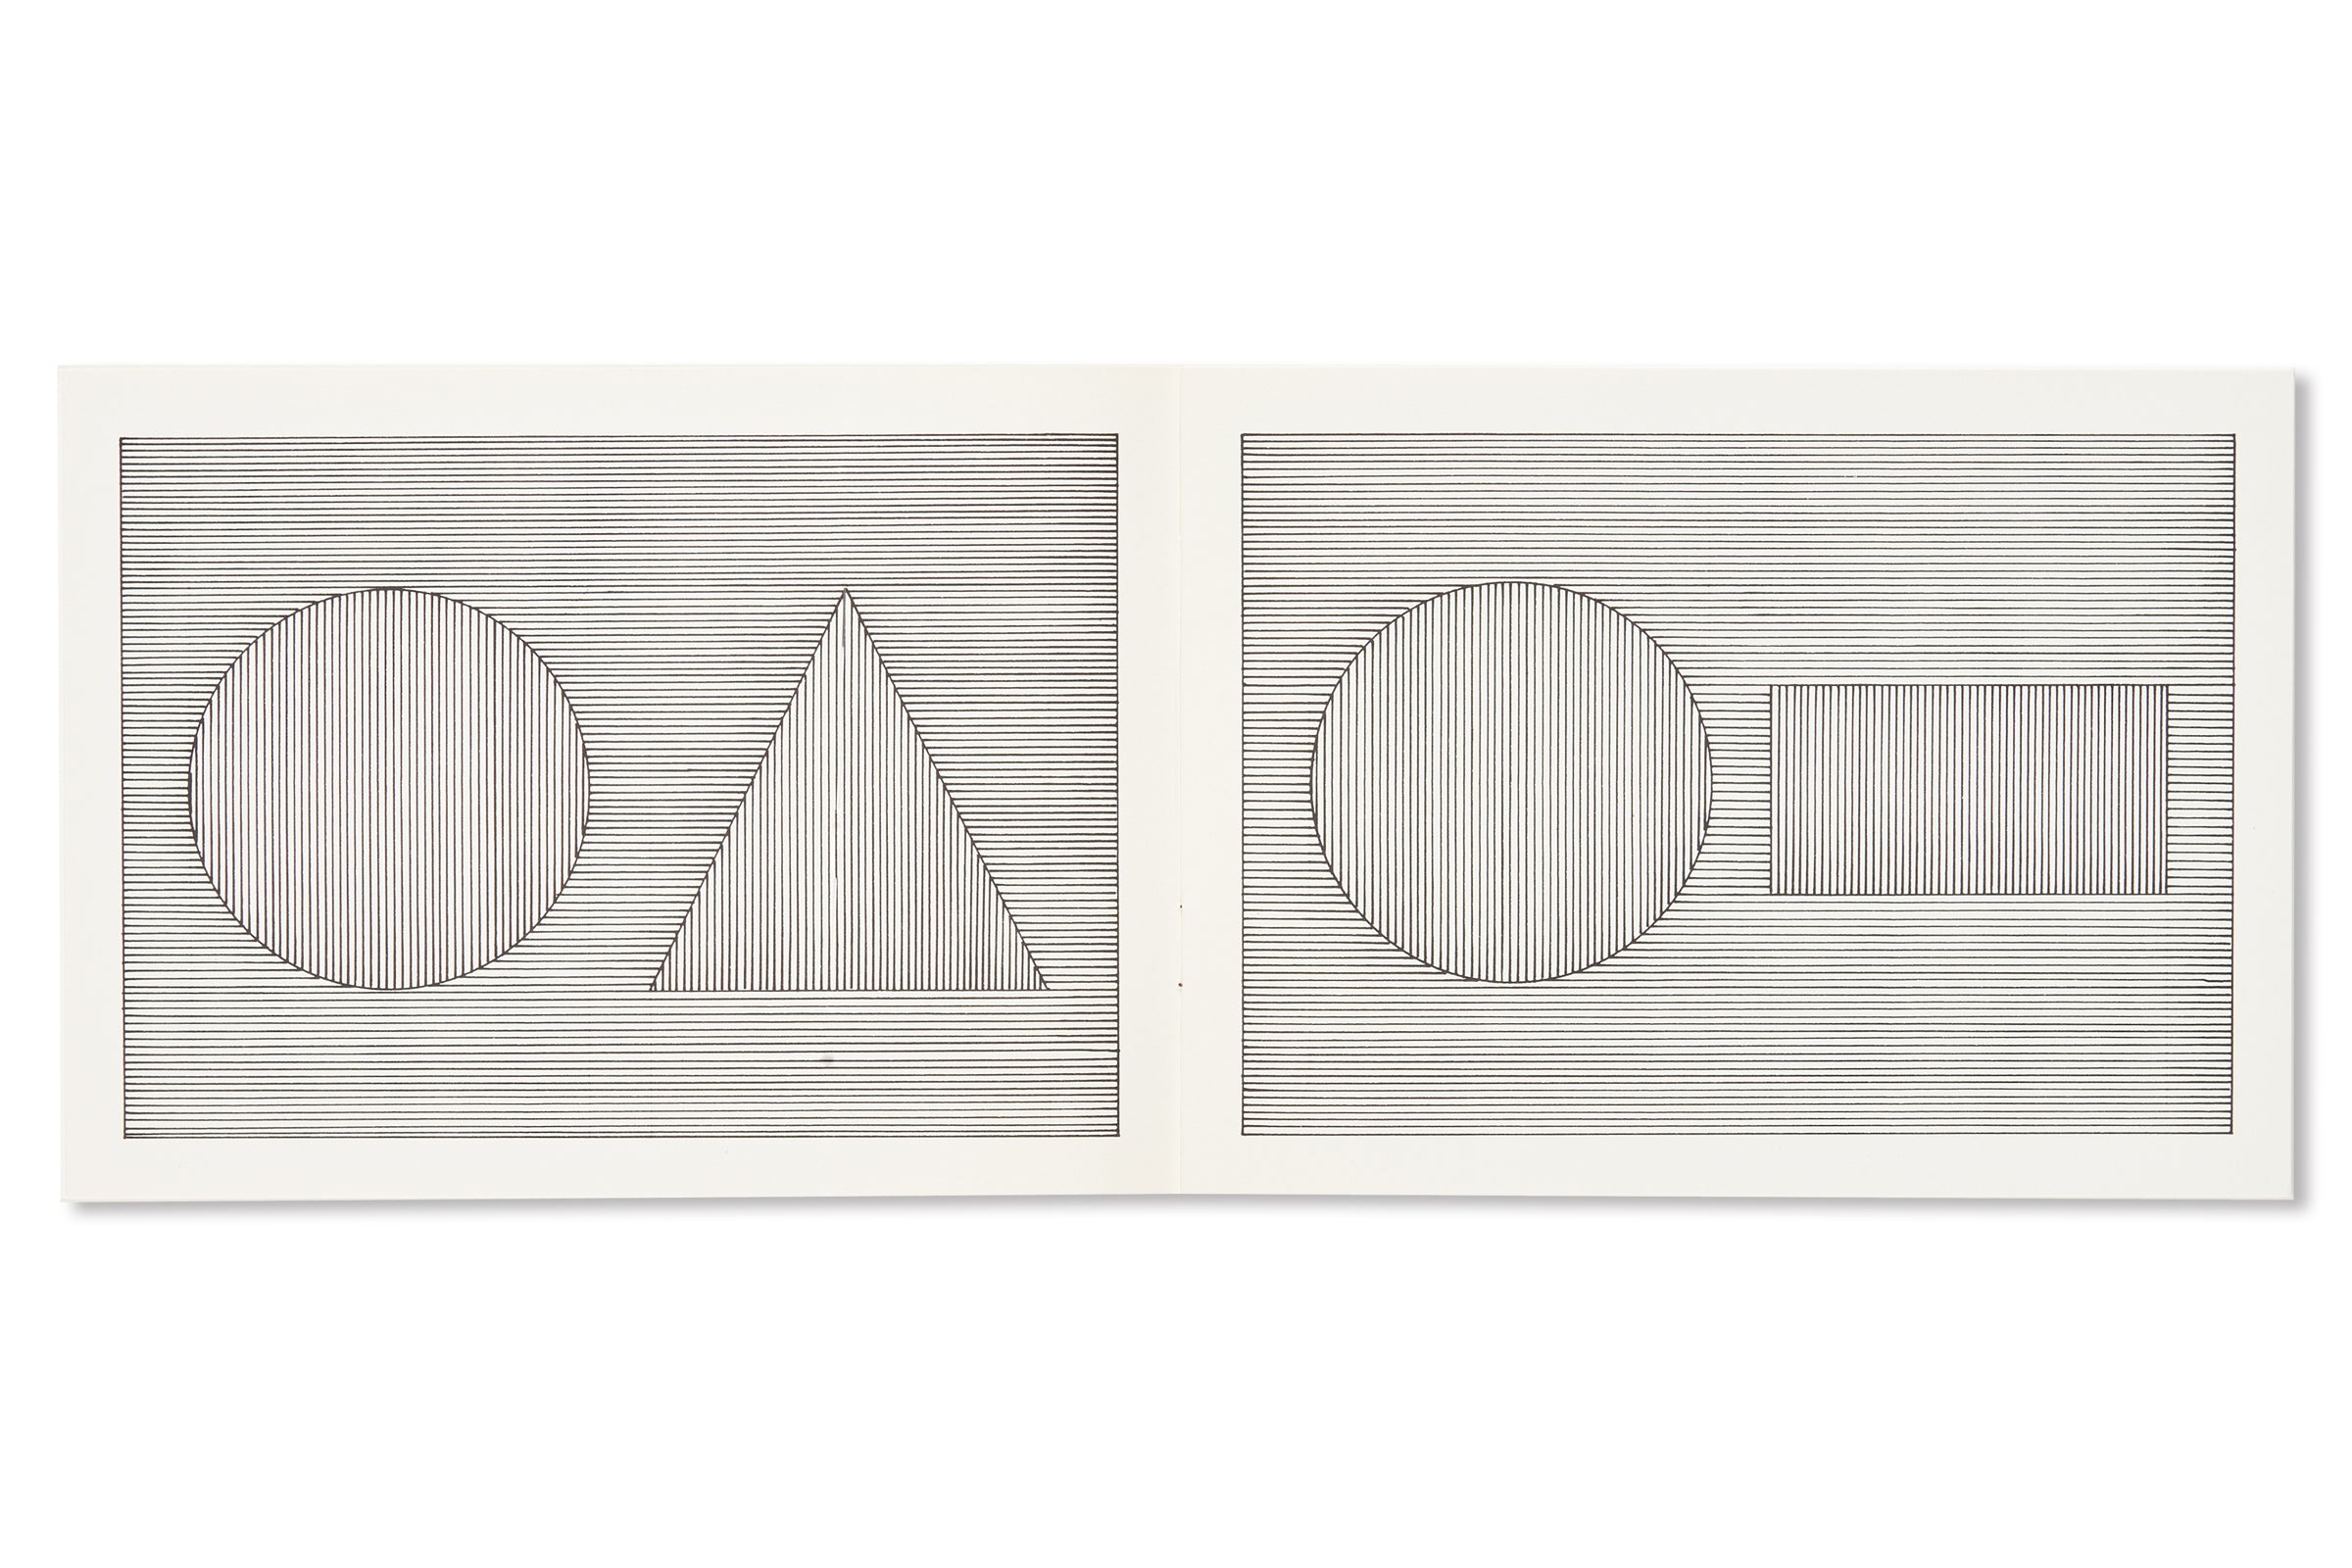 SIX GEOMETRIC FIGURES AND ALL THEIR DOUBLE COMBINATIONS by Sol LeWitt